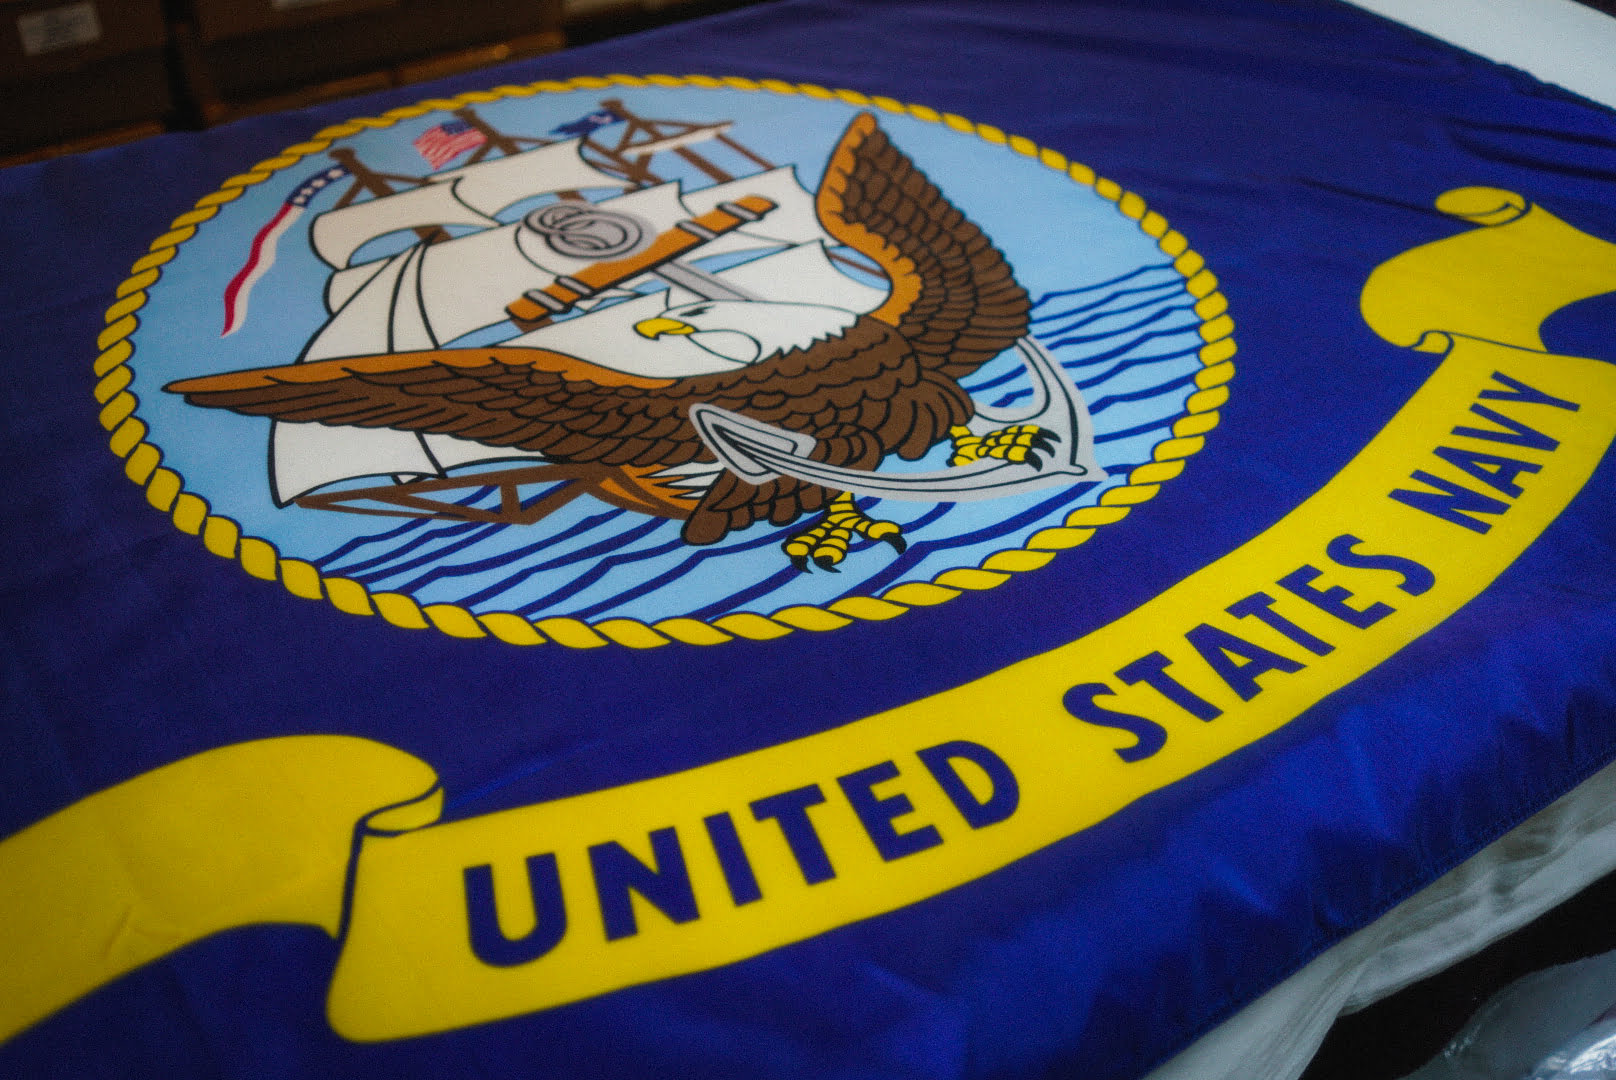 October is Navy Month: Honoring the Navy Birthday and National Navy Day